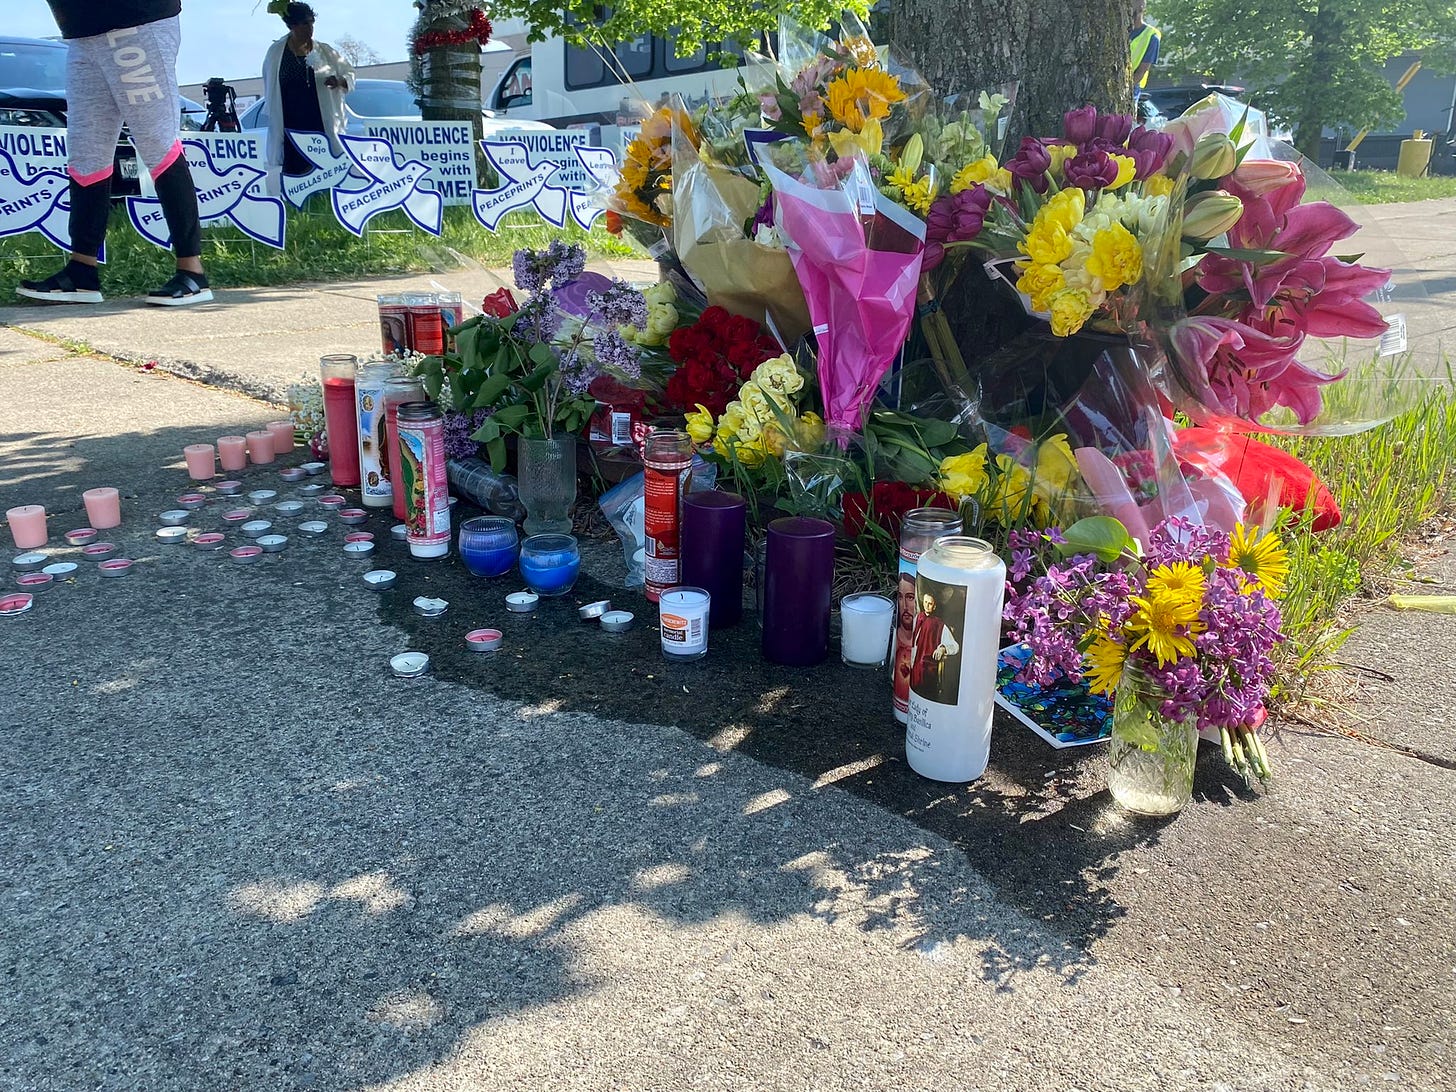 Flowers and prayer candles in vibrant yellow, pink, red, green and purples gathered under a tree beside signs saying "nonviolence" and "peaceprints"